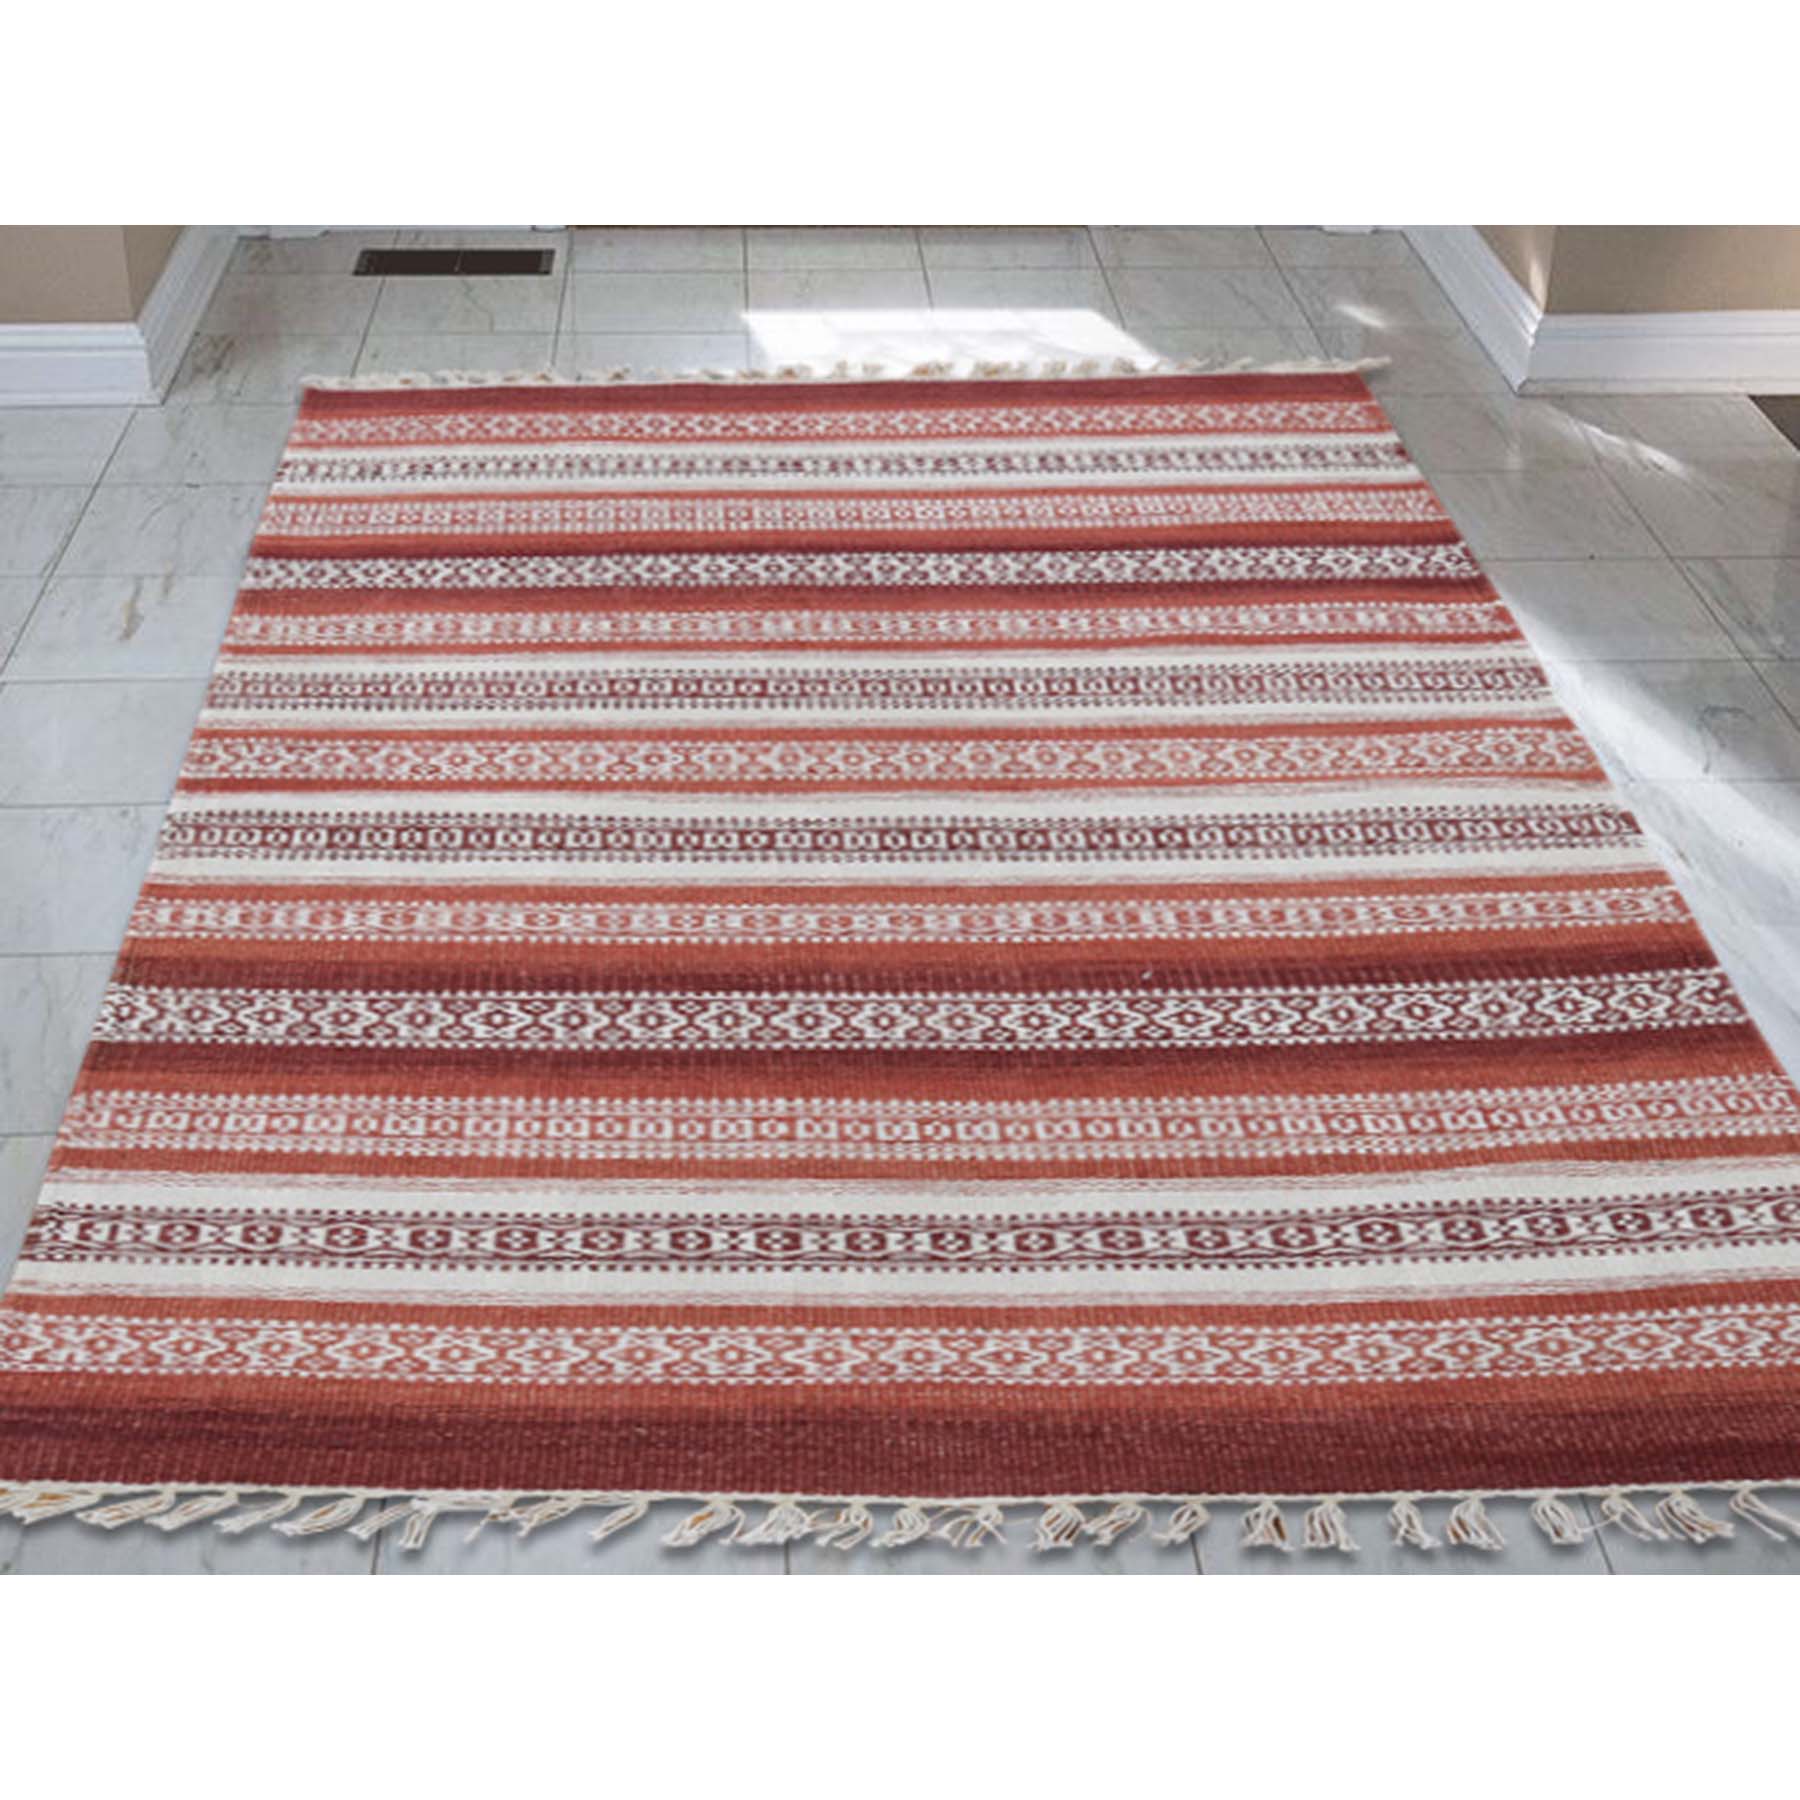 2-10 x5- Hand Woven Flat Weave Striped Design Durie Kilim Oriental Rug 